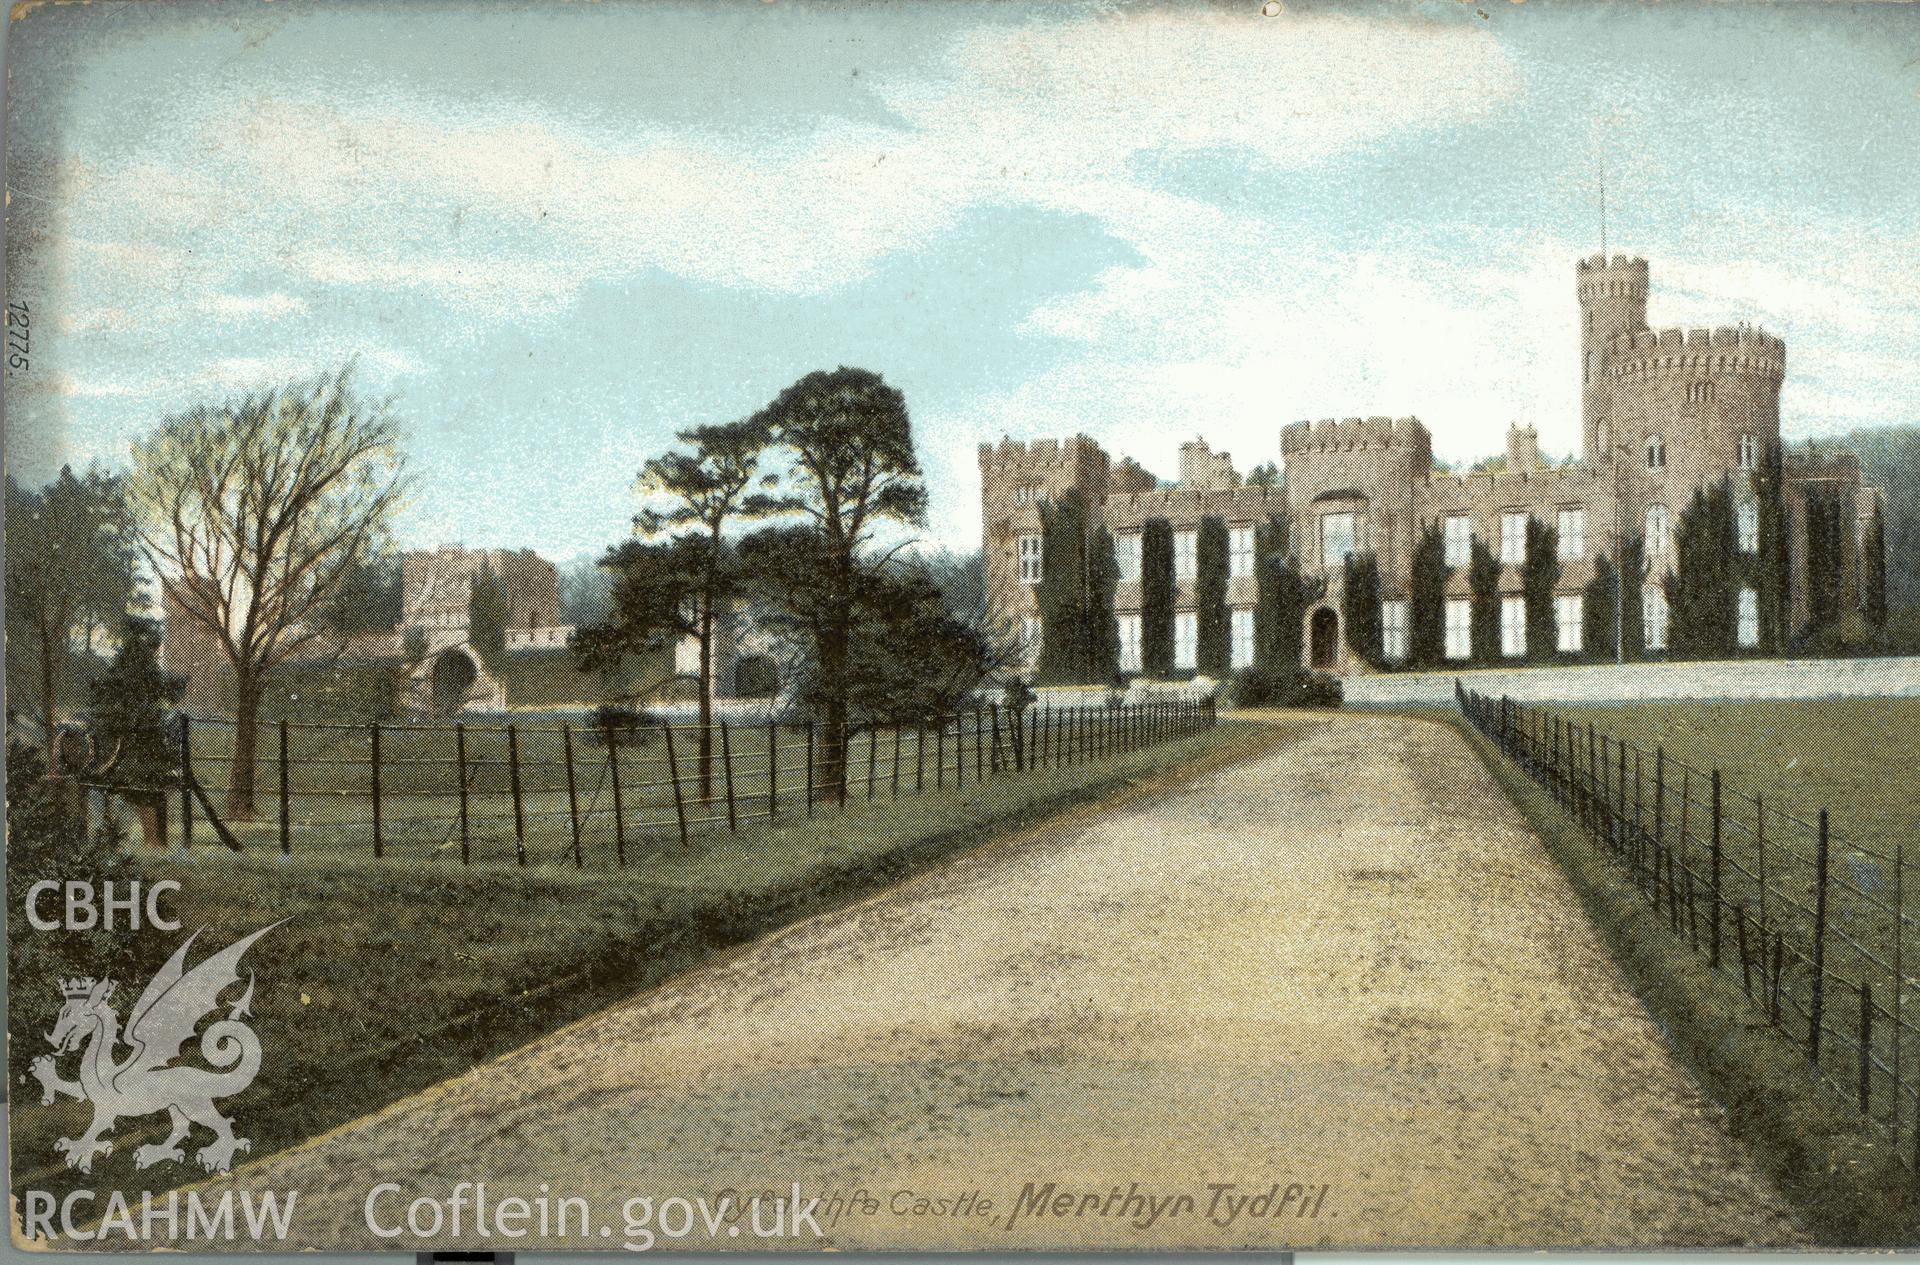 Digitised postcard image of Cyfarthfa Castle, Merthyr Tydfil. Produced by Parks and Gardens Data Services, from an original item in the Peter Davis Collection at Parks and Gardens UK. We hold only web-resolution images of this collection, suitable for viewing on screen and for research purposes only. We do not hold the original images, or publication quality scans.